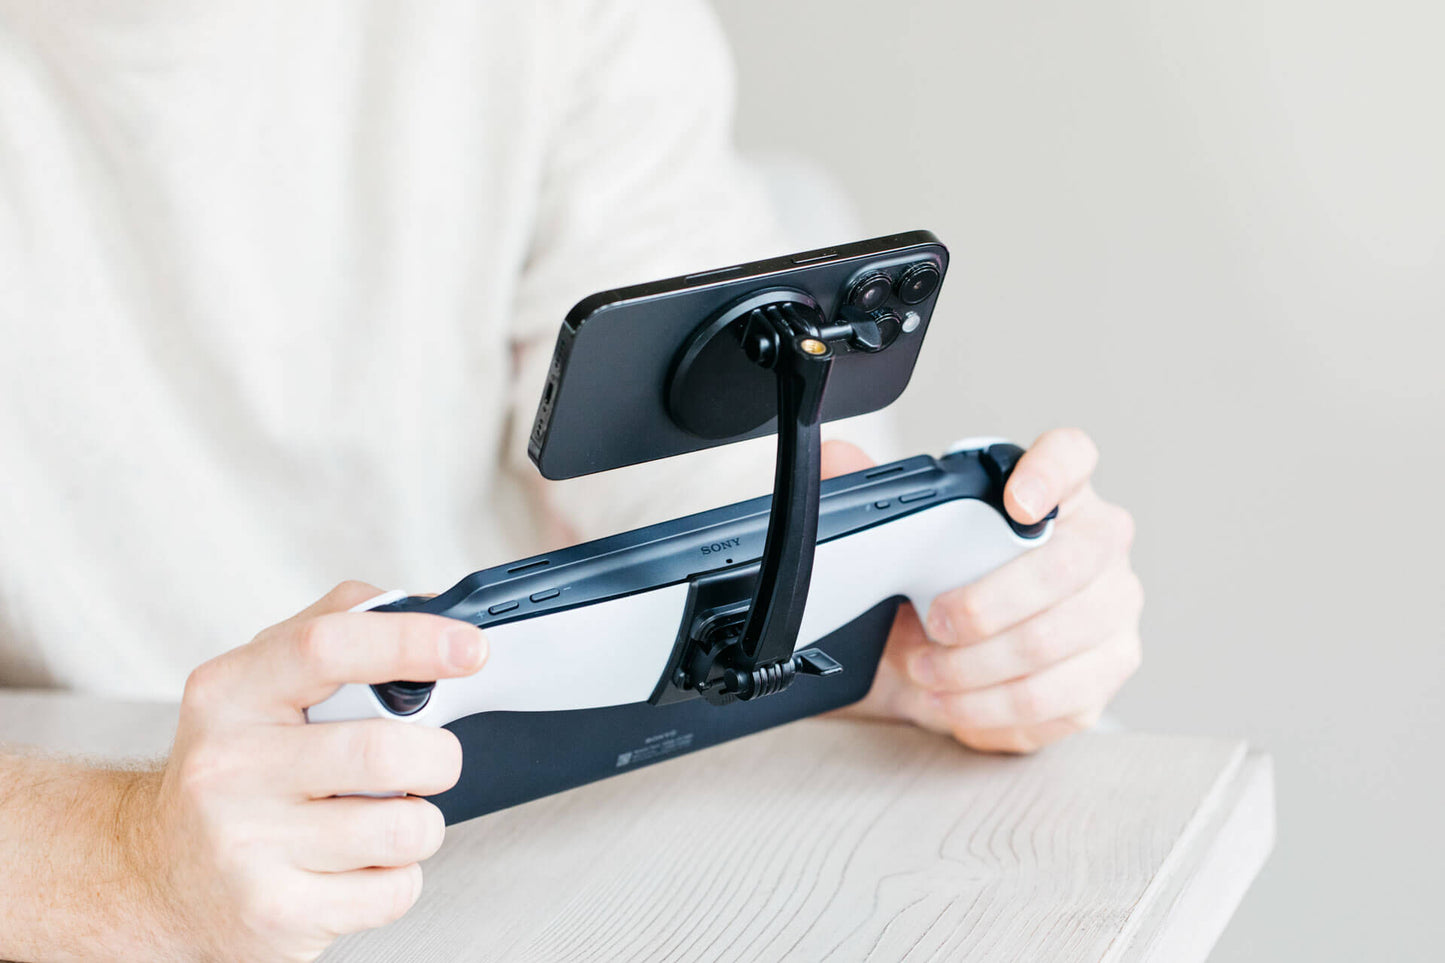 A phone mounted horizontally above a Playstation Portal using the Mechanism Phone Mount.